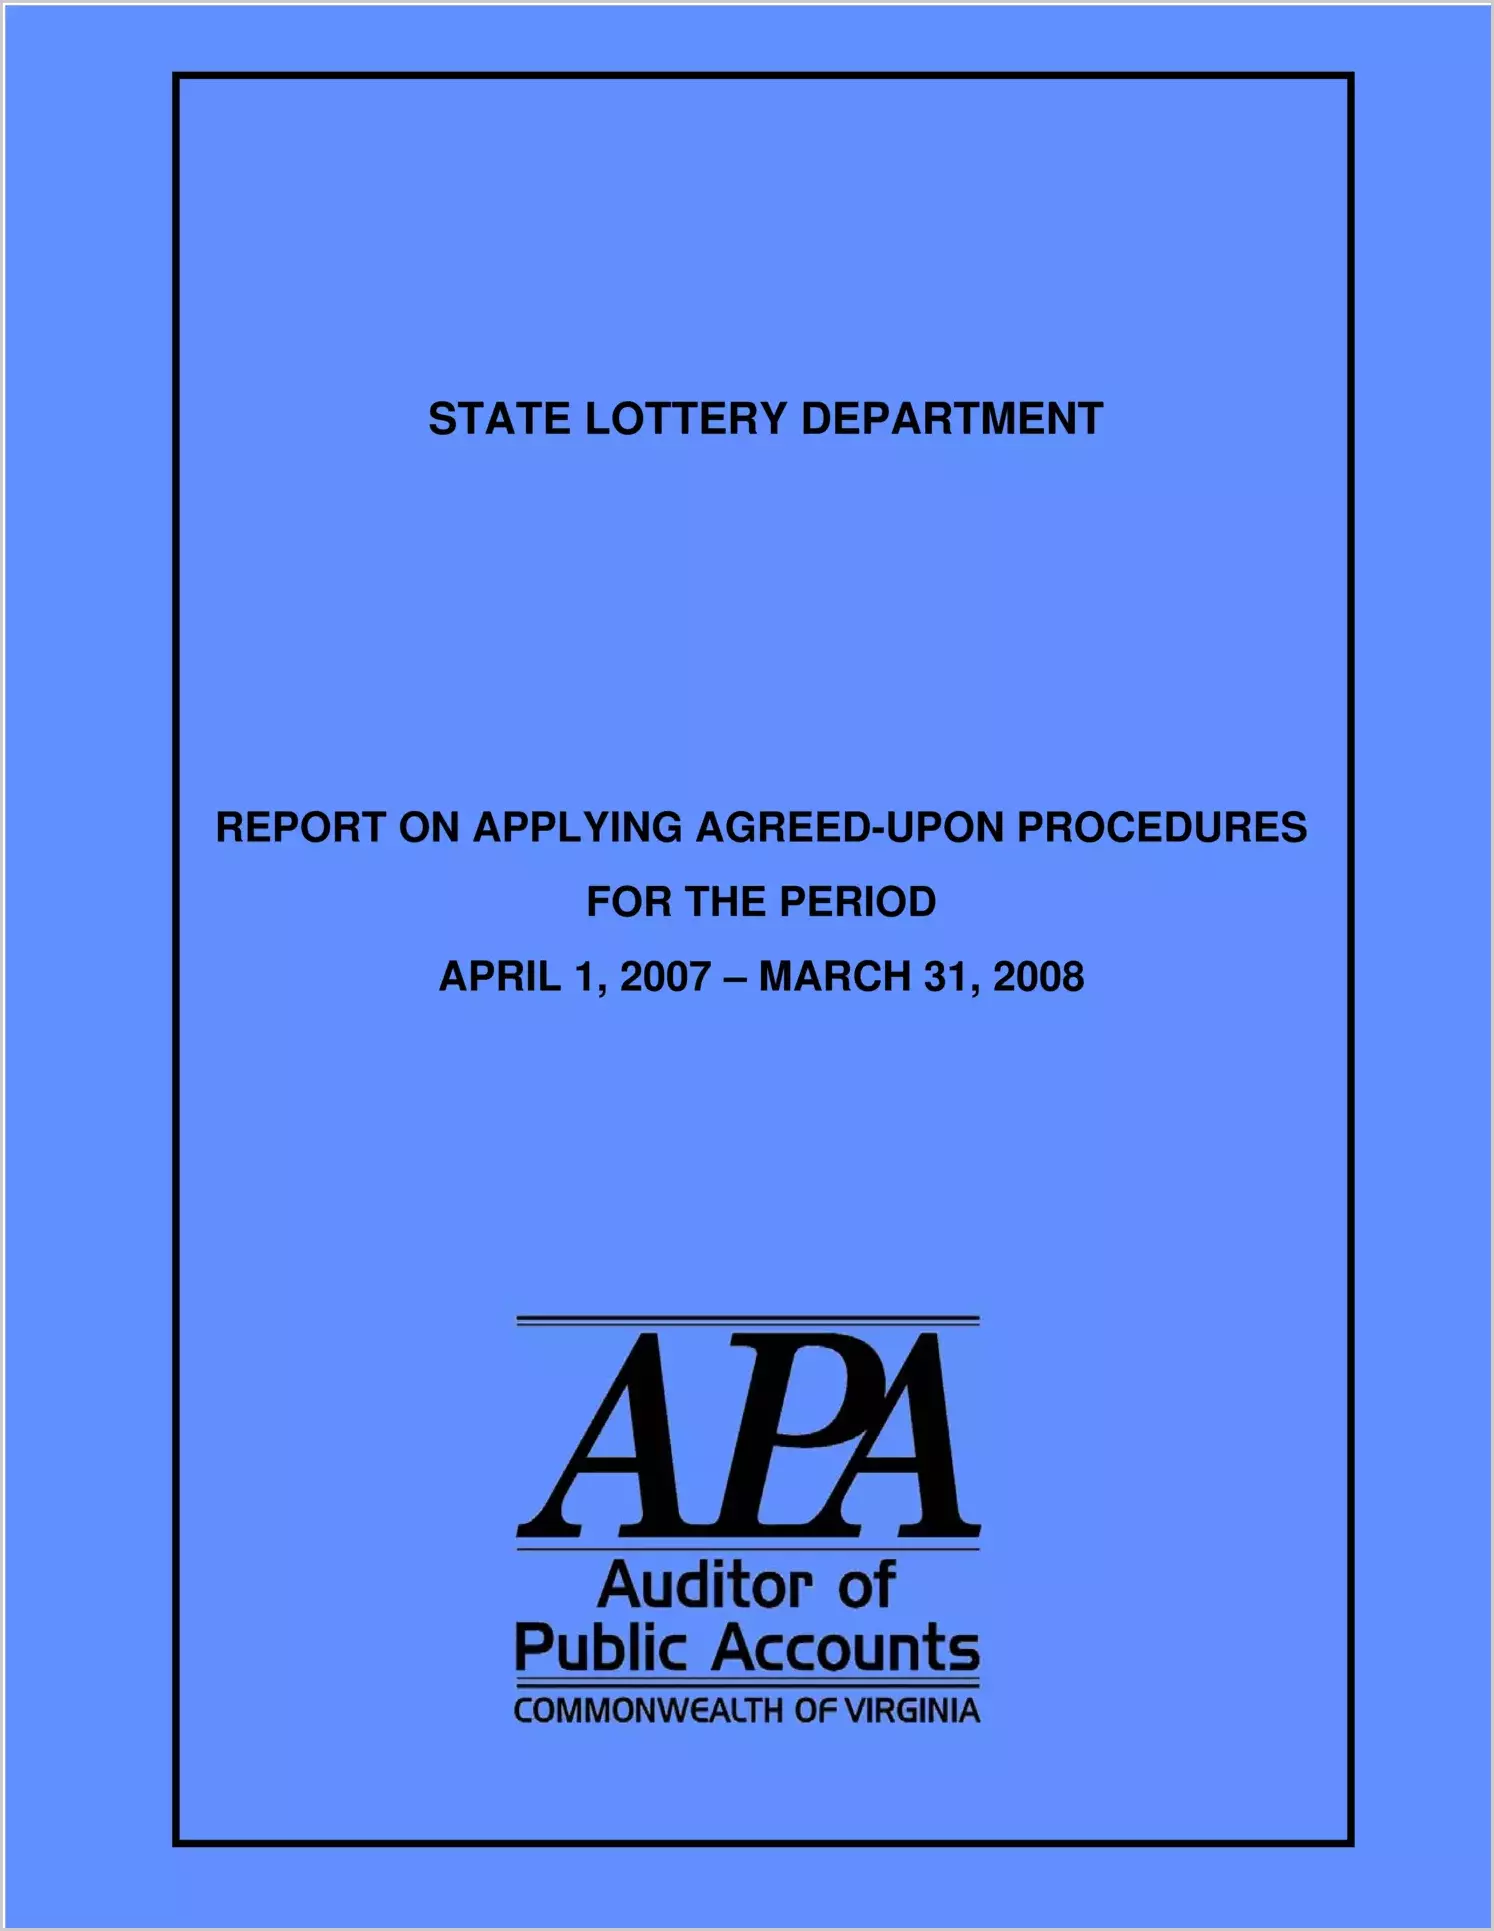 State Lottery Department report on Applying Agreed-Upon Procedures (MegaMillions) for the period April 1, 2007 throuhg March 31, 2008